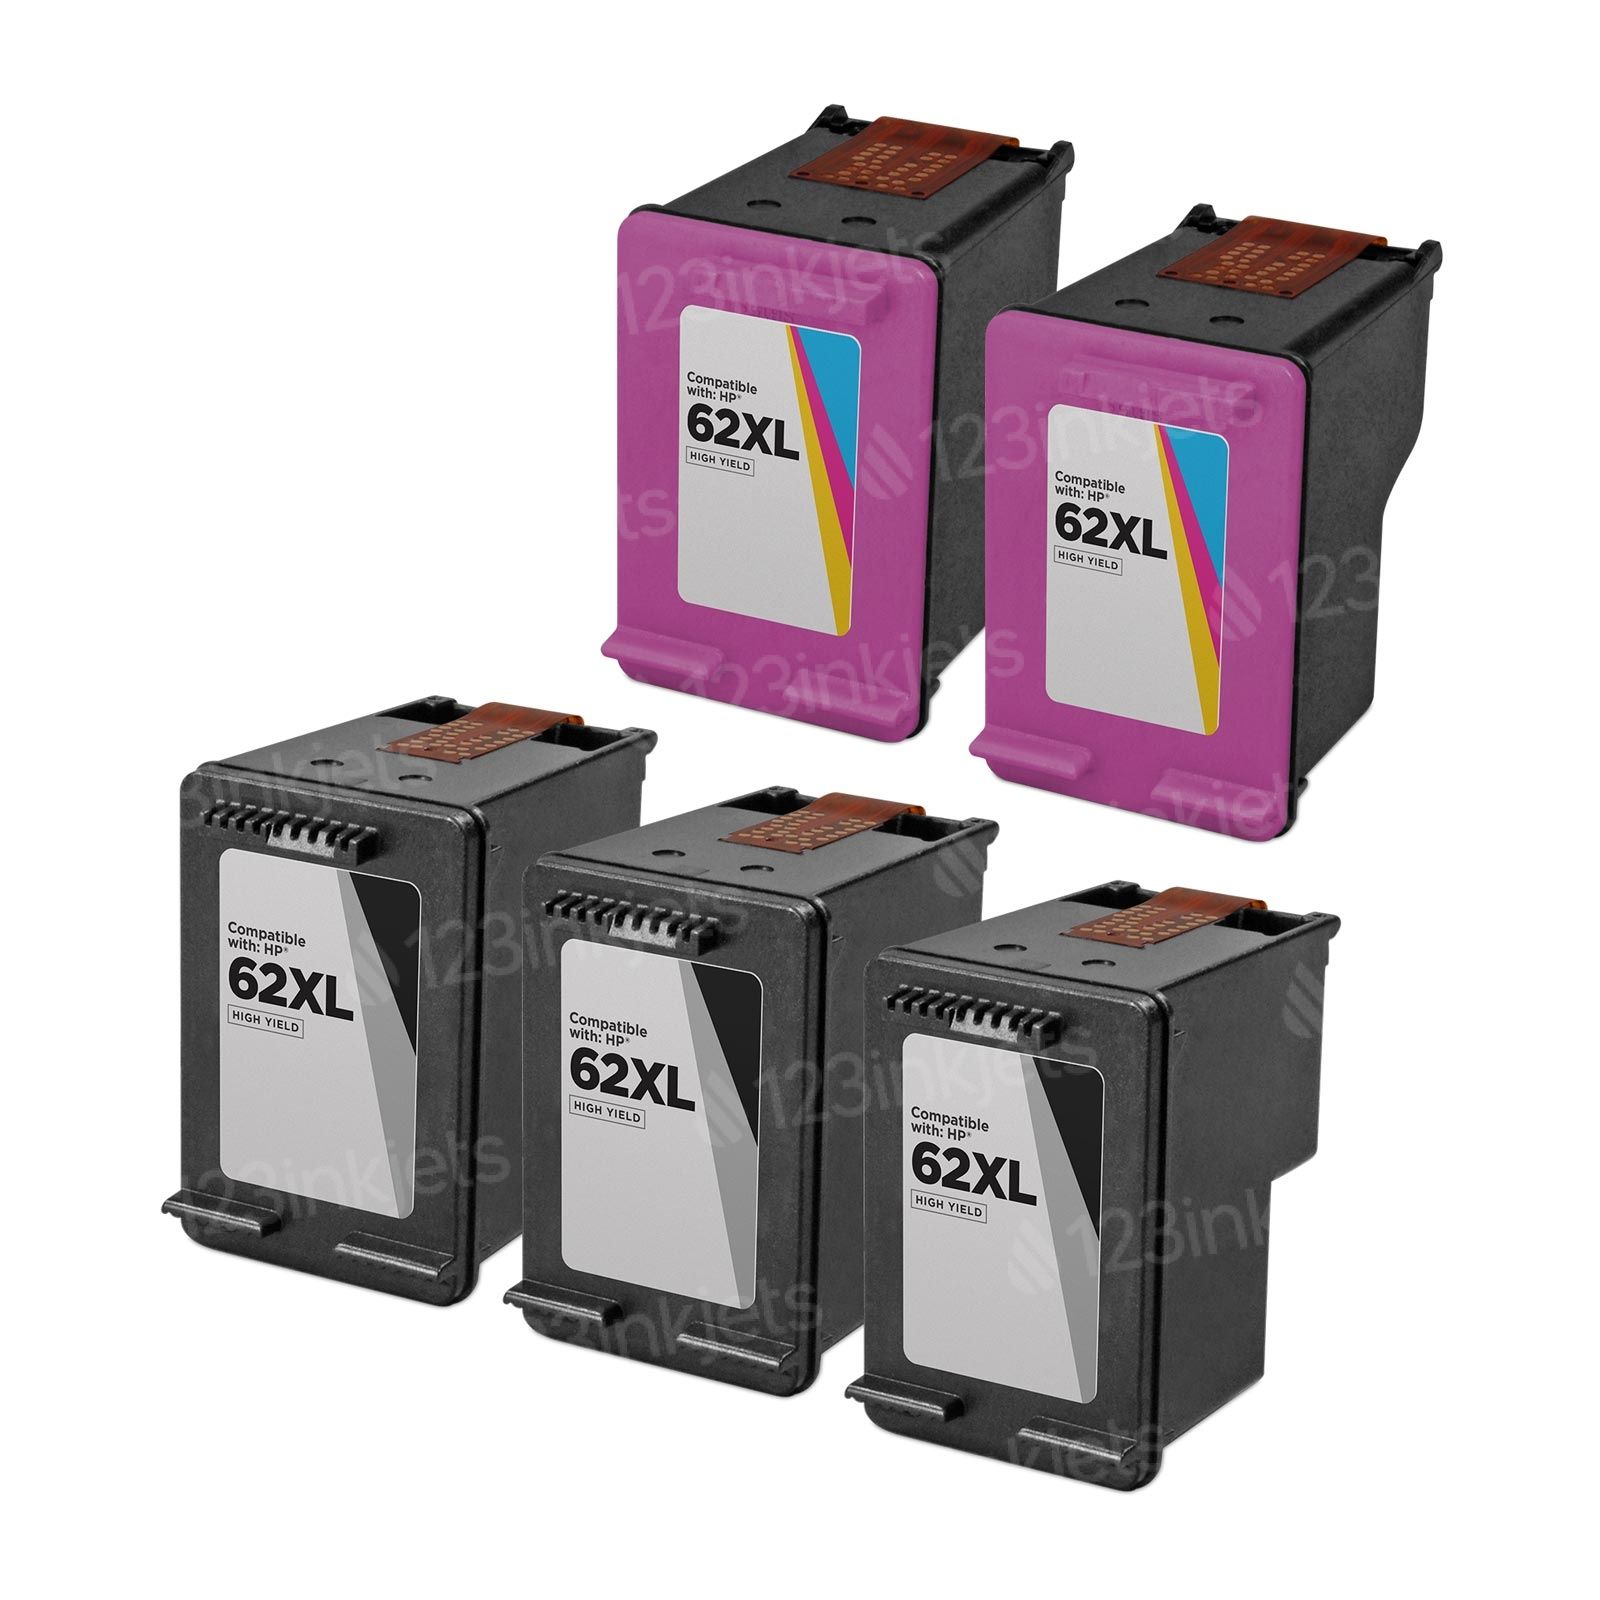 5 Piece Set of Remanufactured Replacement Ink Cartridges for HP